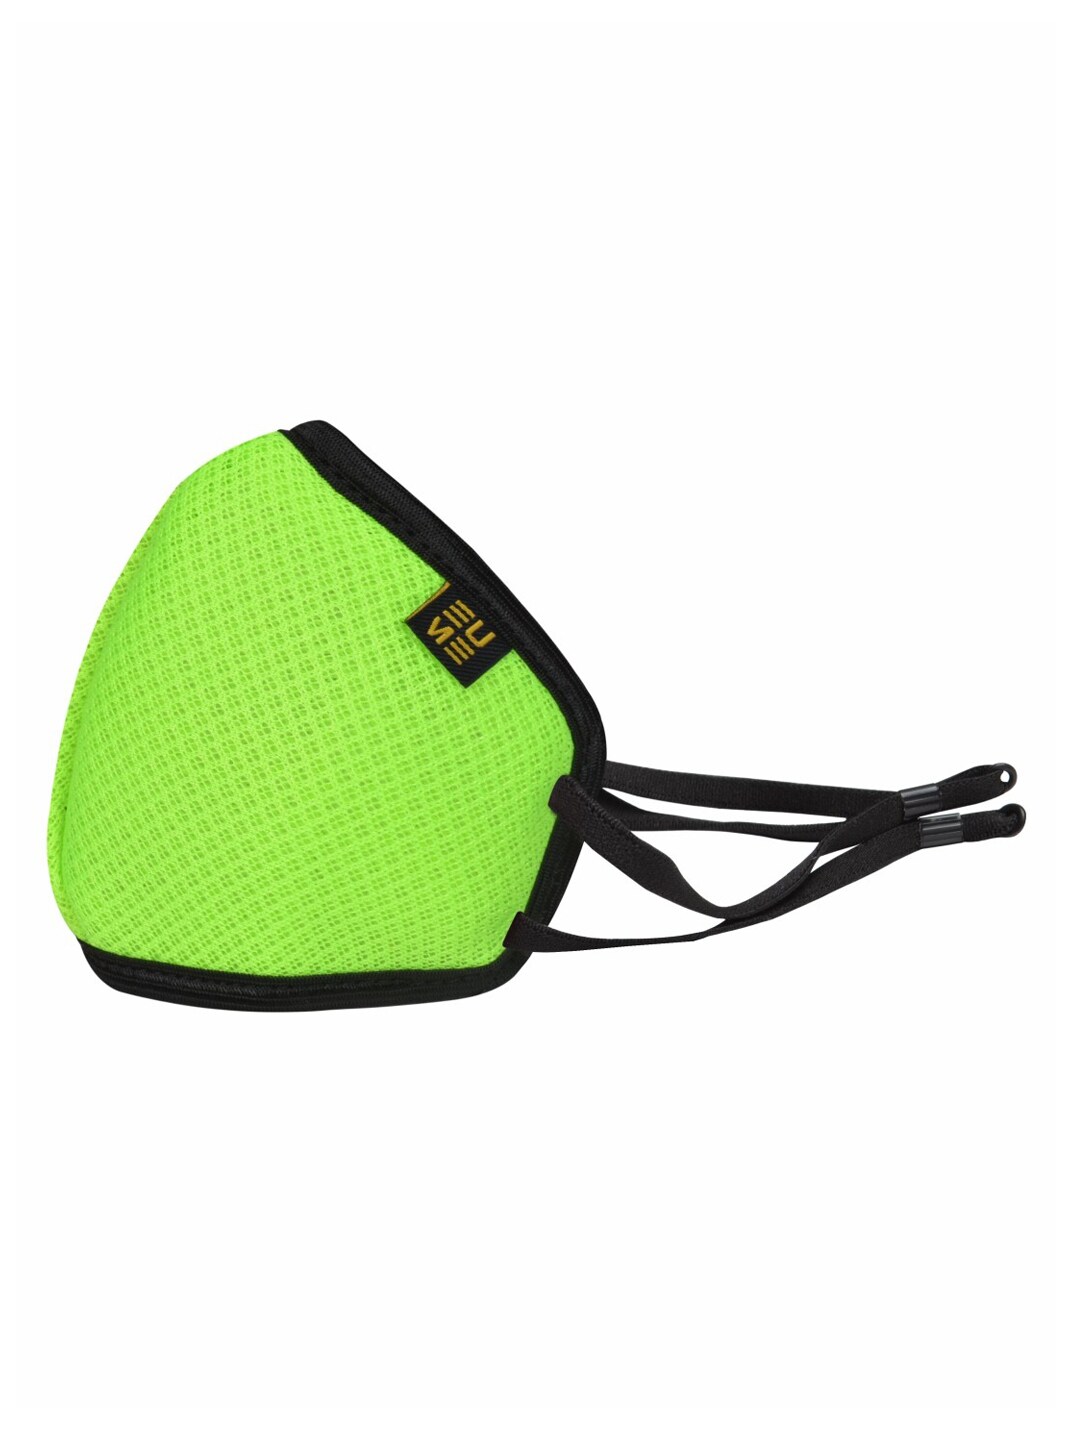 EUME Green Protect+ 95 Reusable and Washable Outdoor Masks Price in India